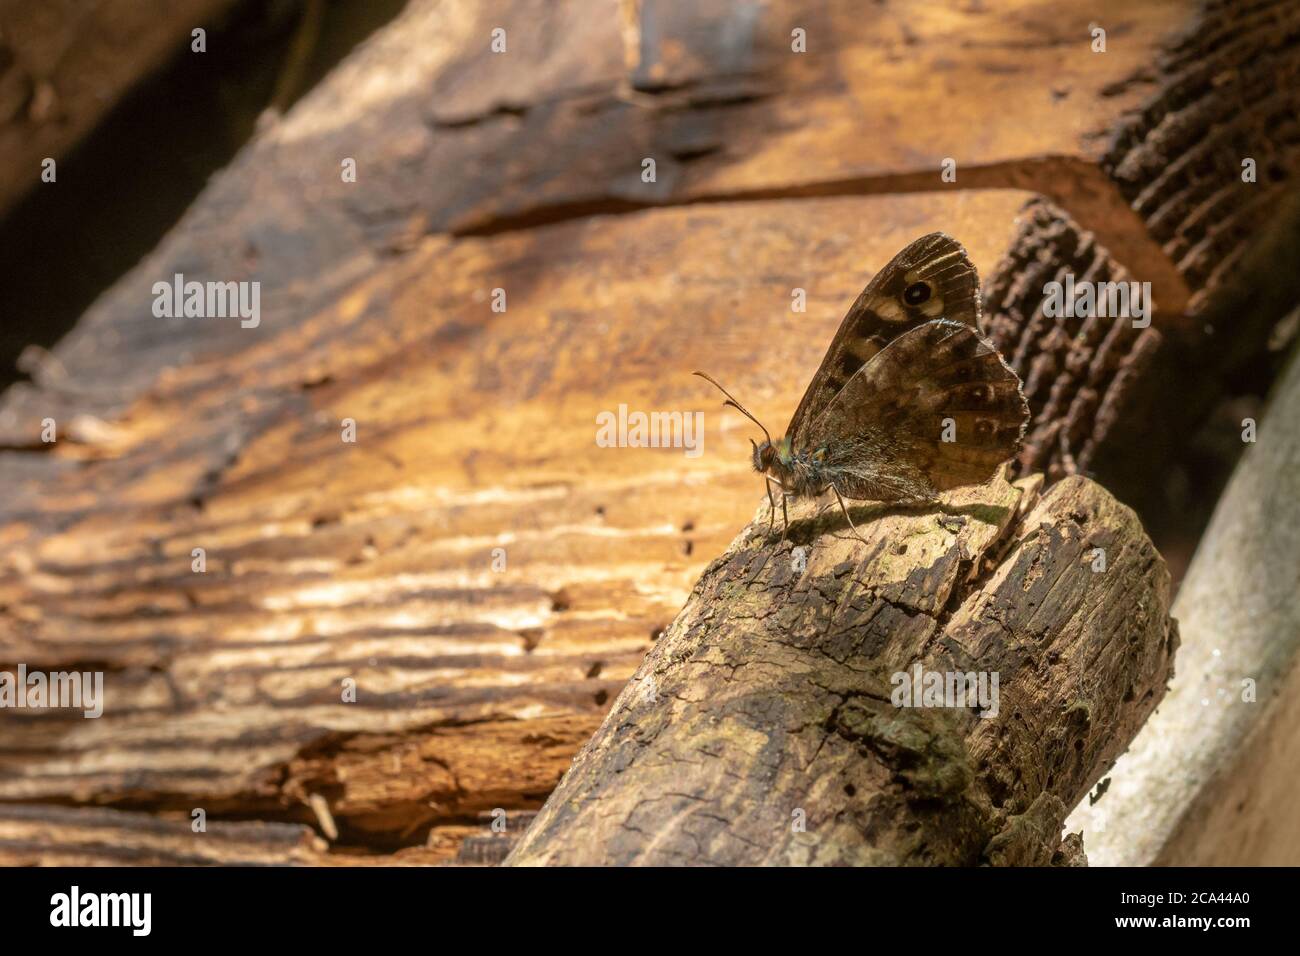 Small brown butterfly sits on a branch in front of dark wooden wall with copy space Stock Photo